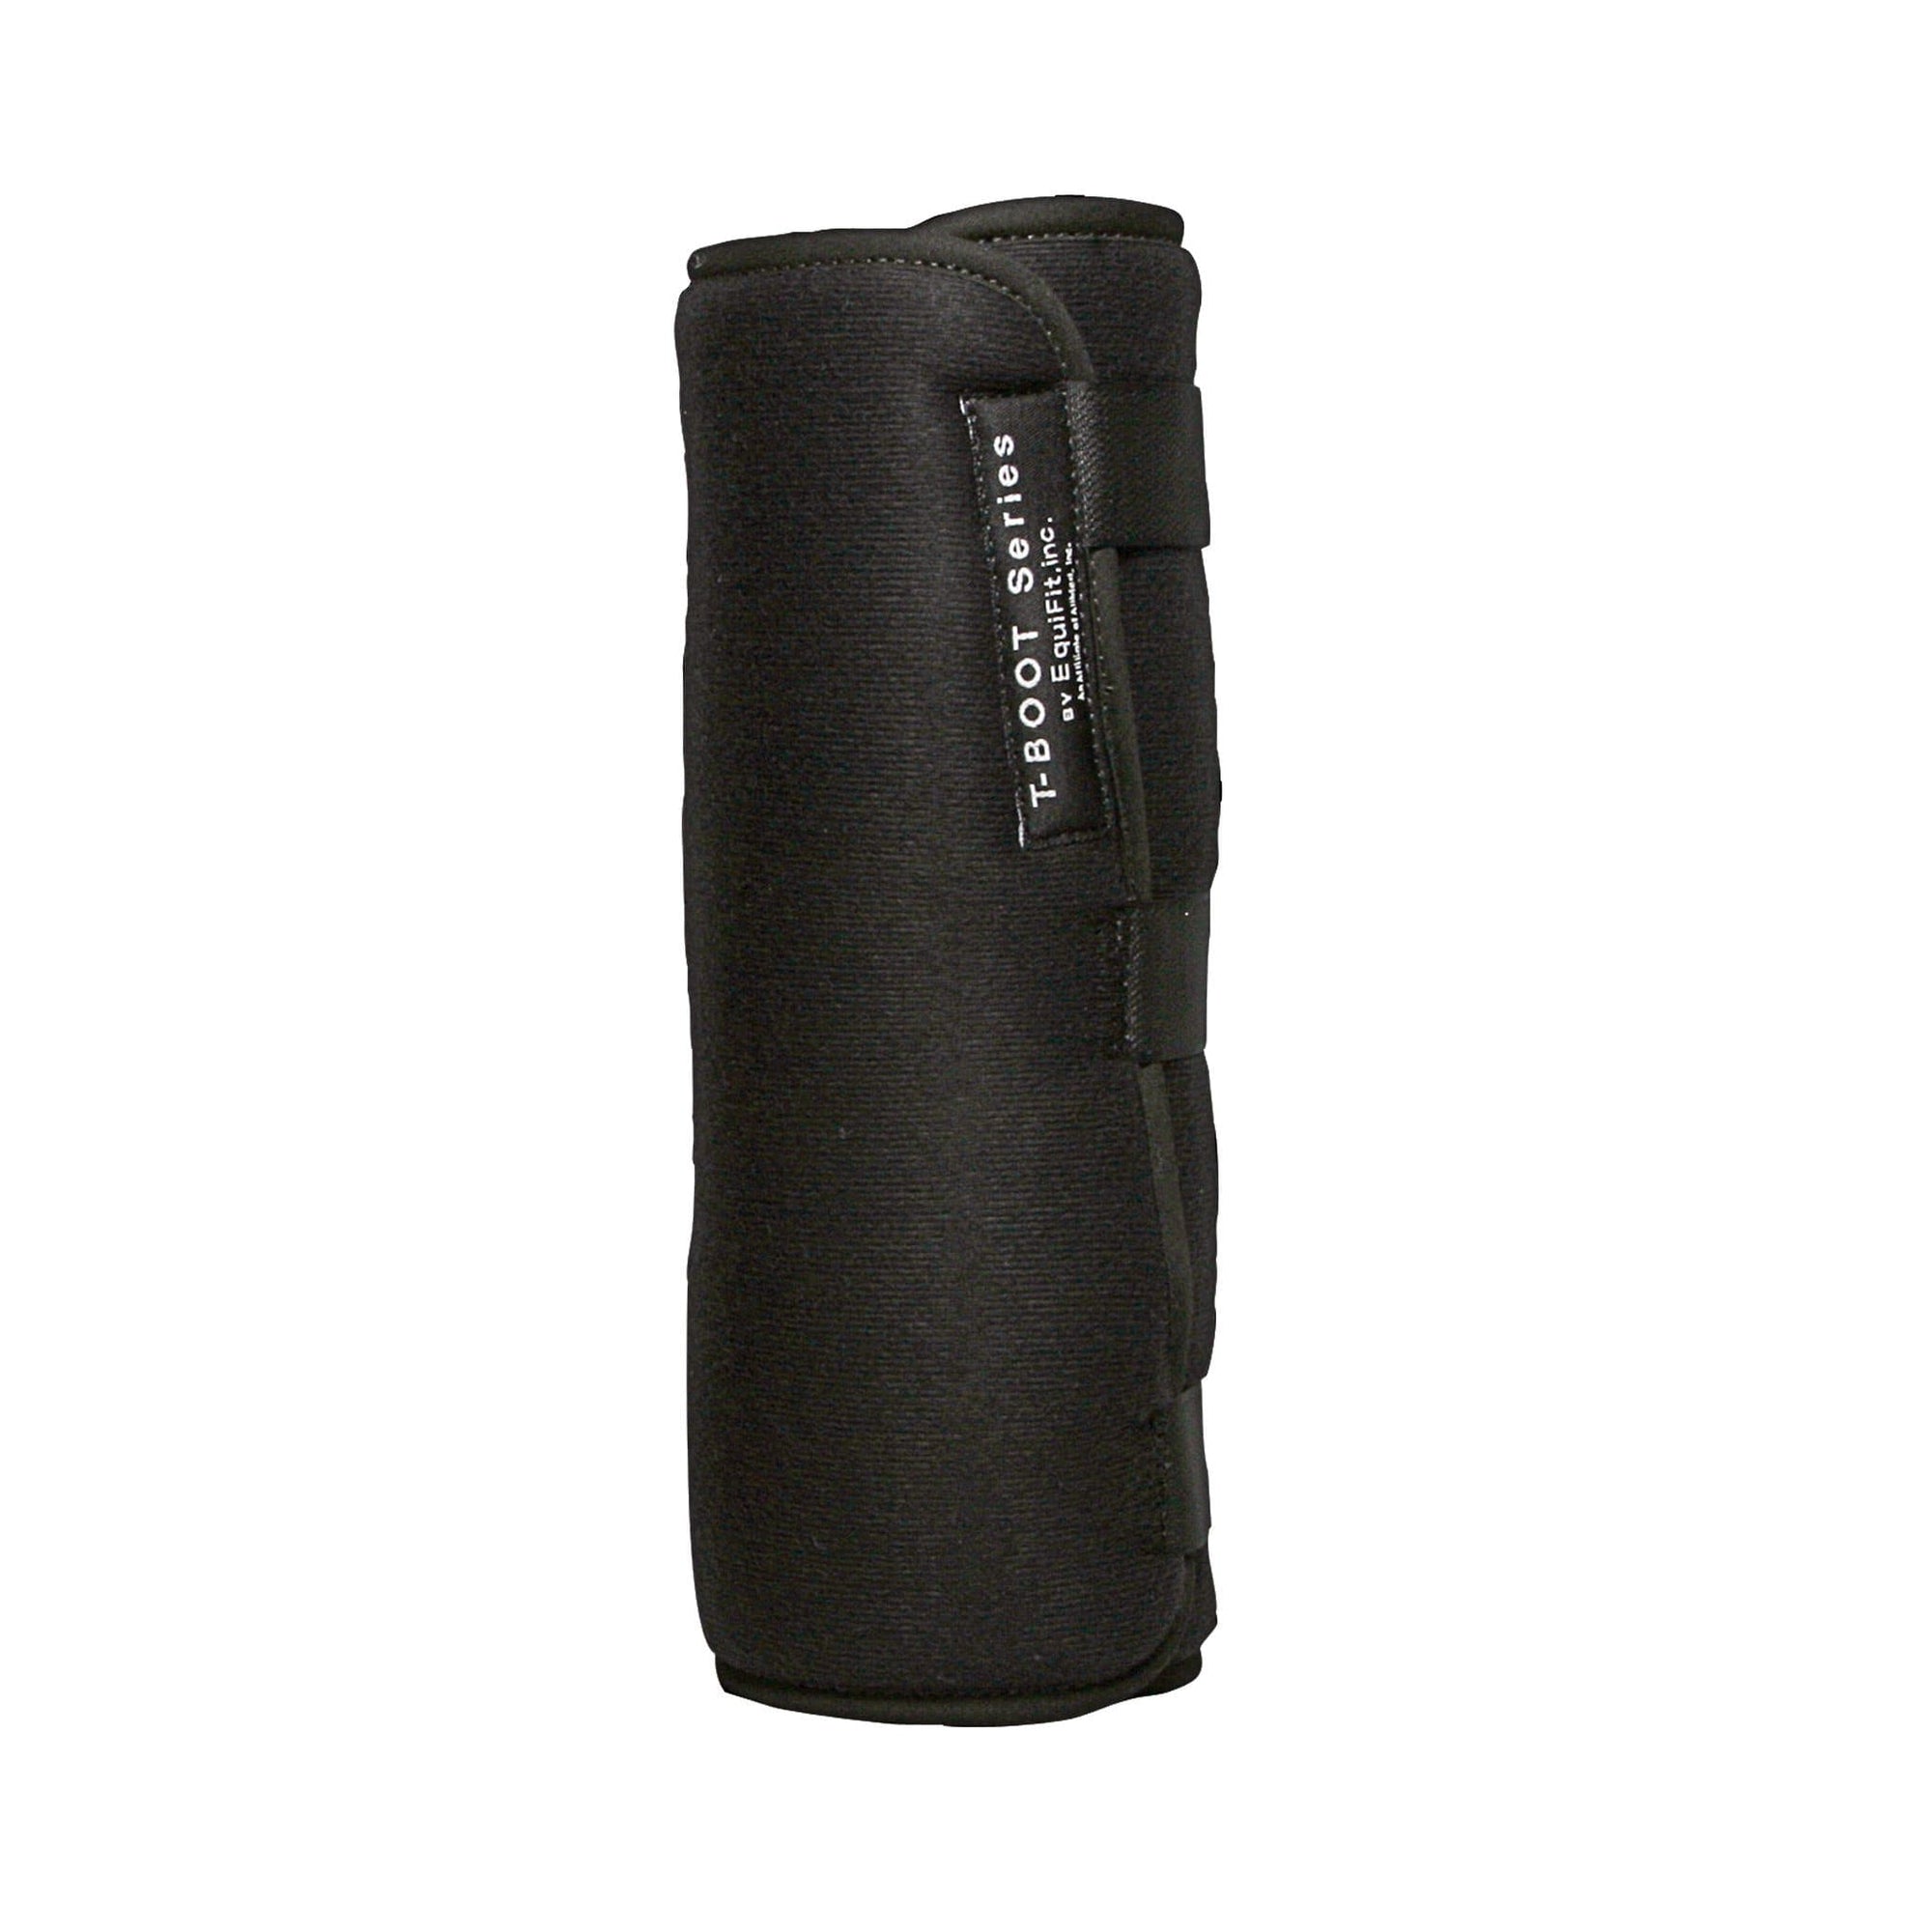 T-Foam Standard Bandage Liners offer additional support and protection from chafing and rubs.